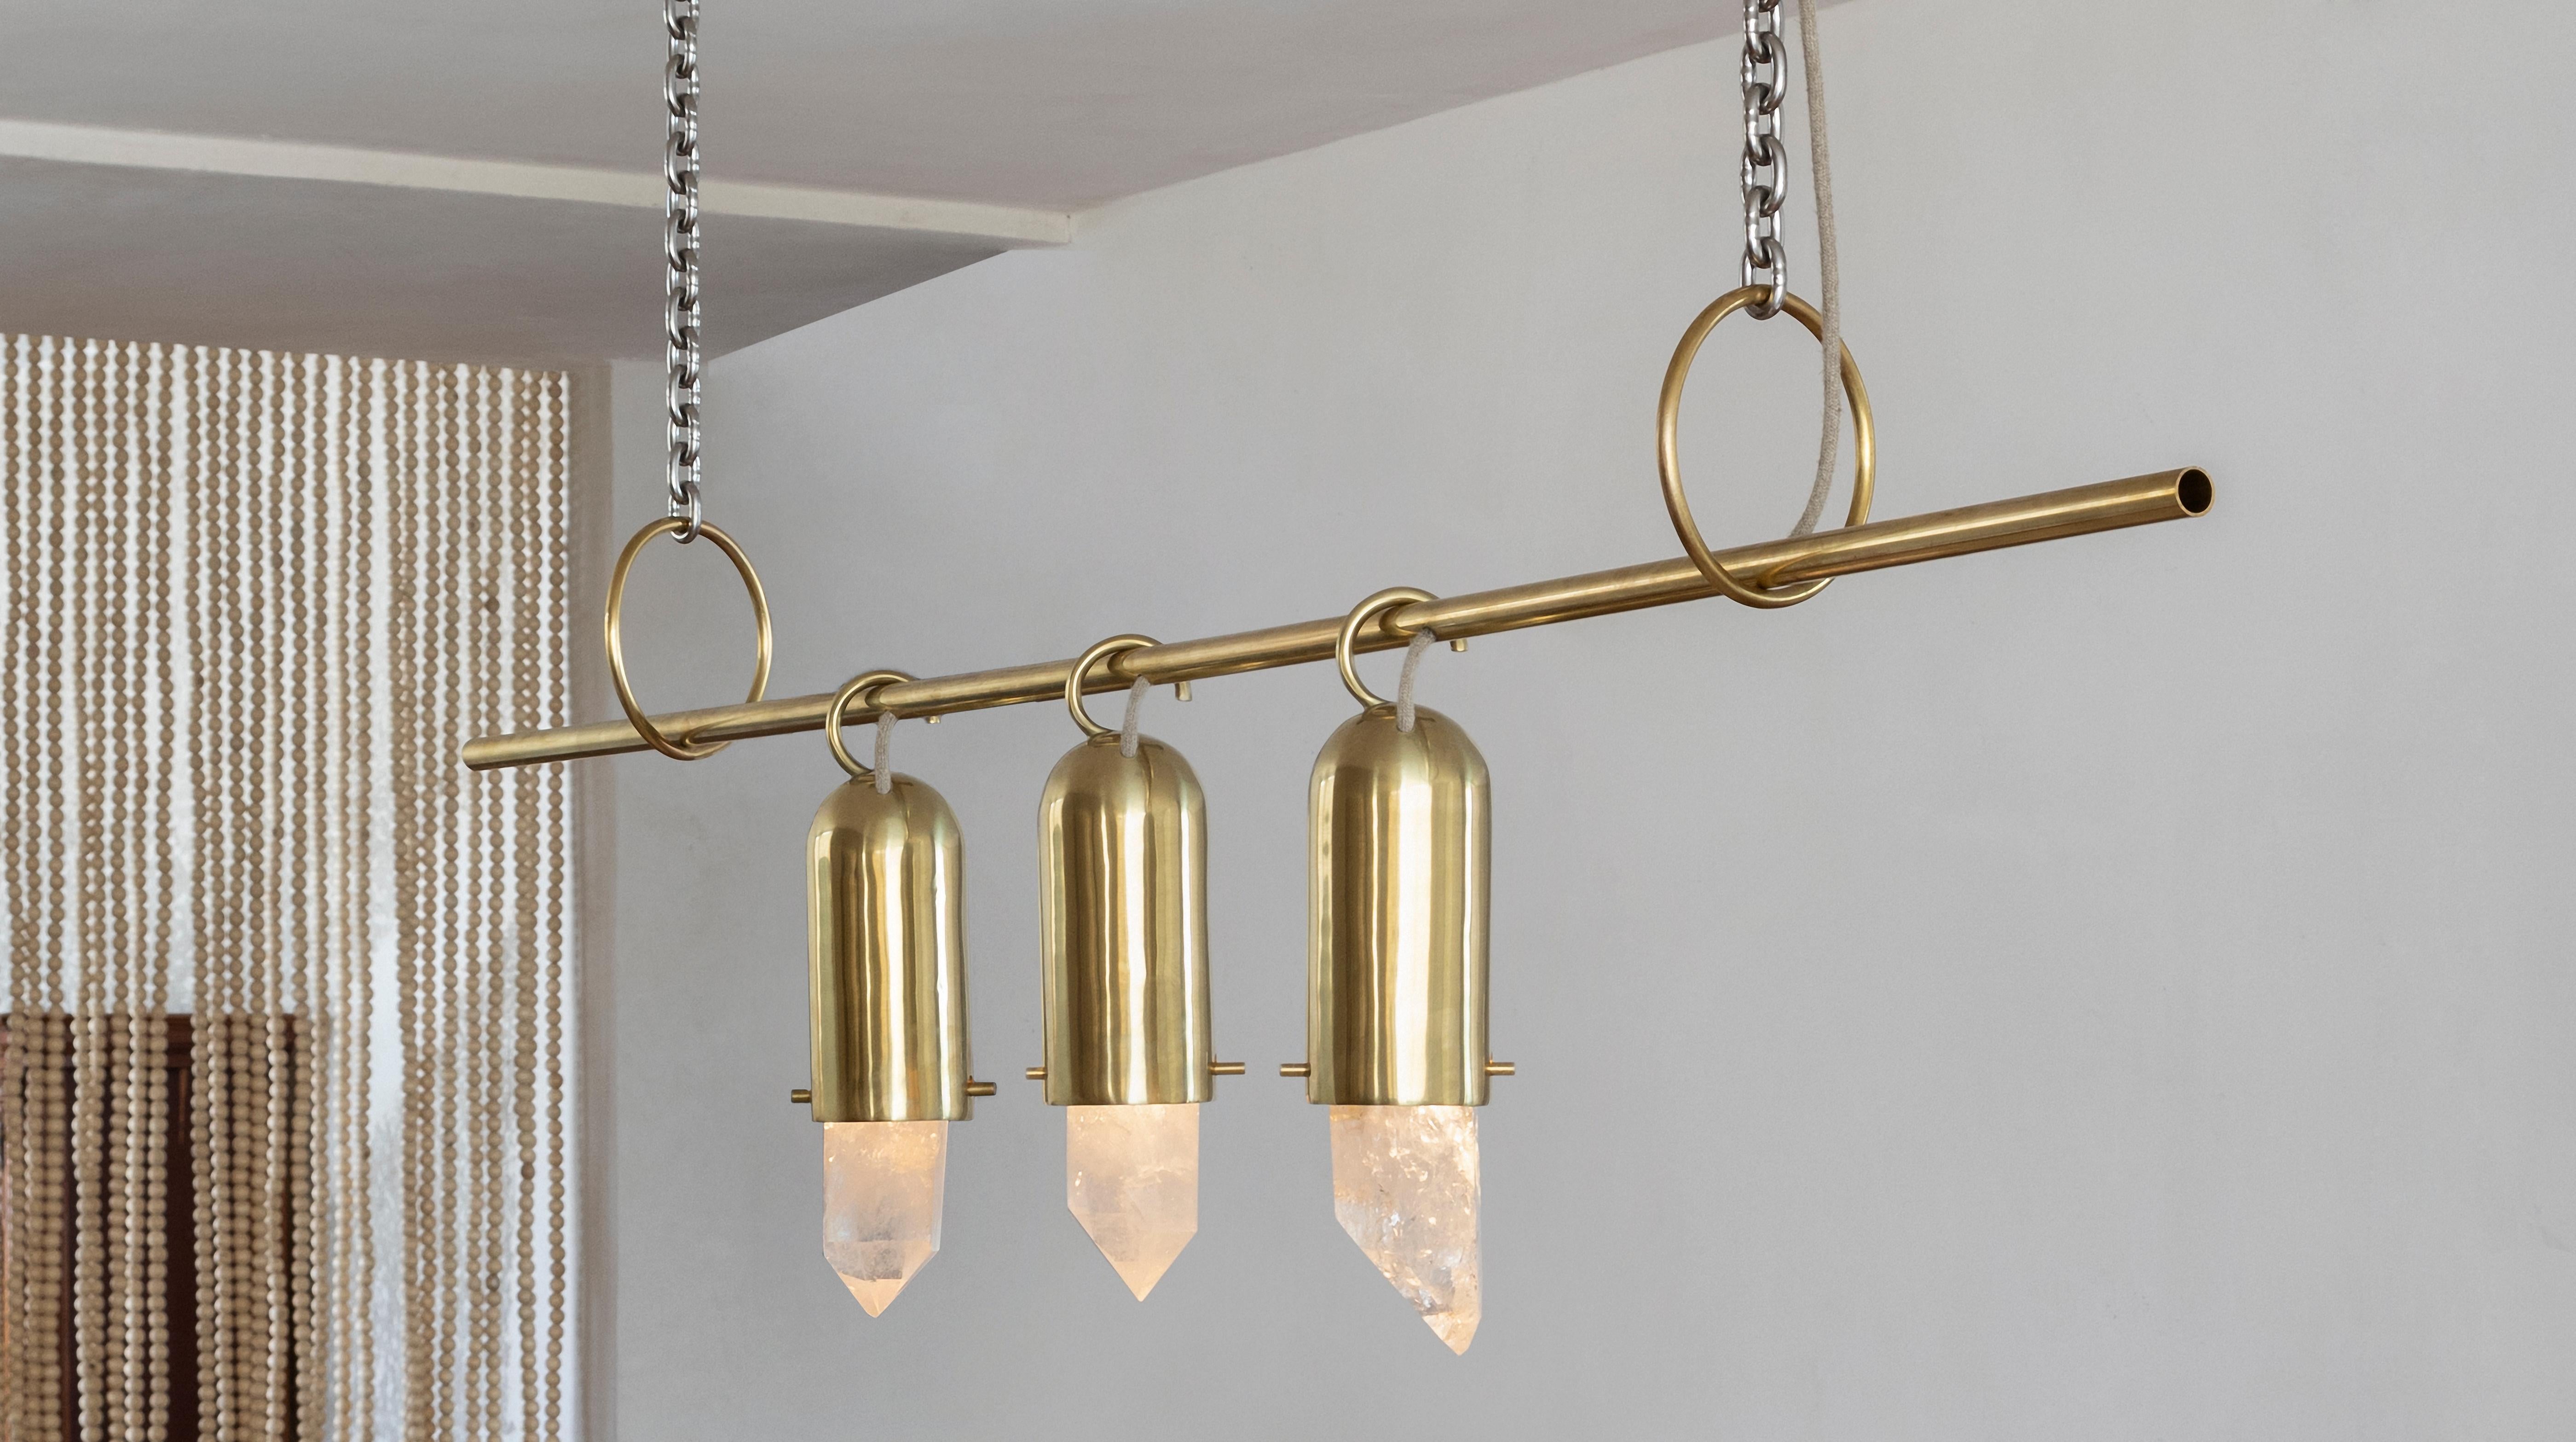 Contemporary golden chandelier, in cast brass and illuminated raw crystal.
Produced in São Paulo, Brazil.

This chandelier was meticulously handmade by master artisans one delicate piece at a time. It is therefore quite difficult, if not impossible